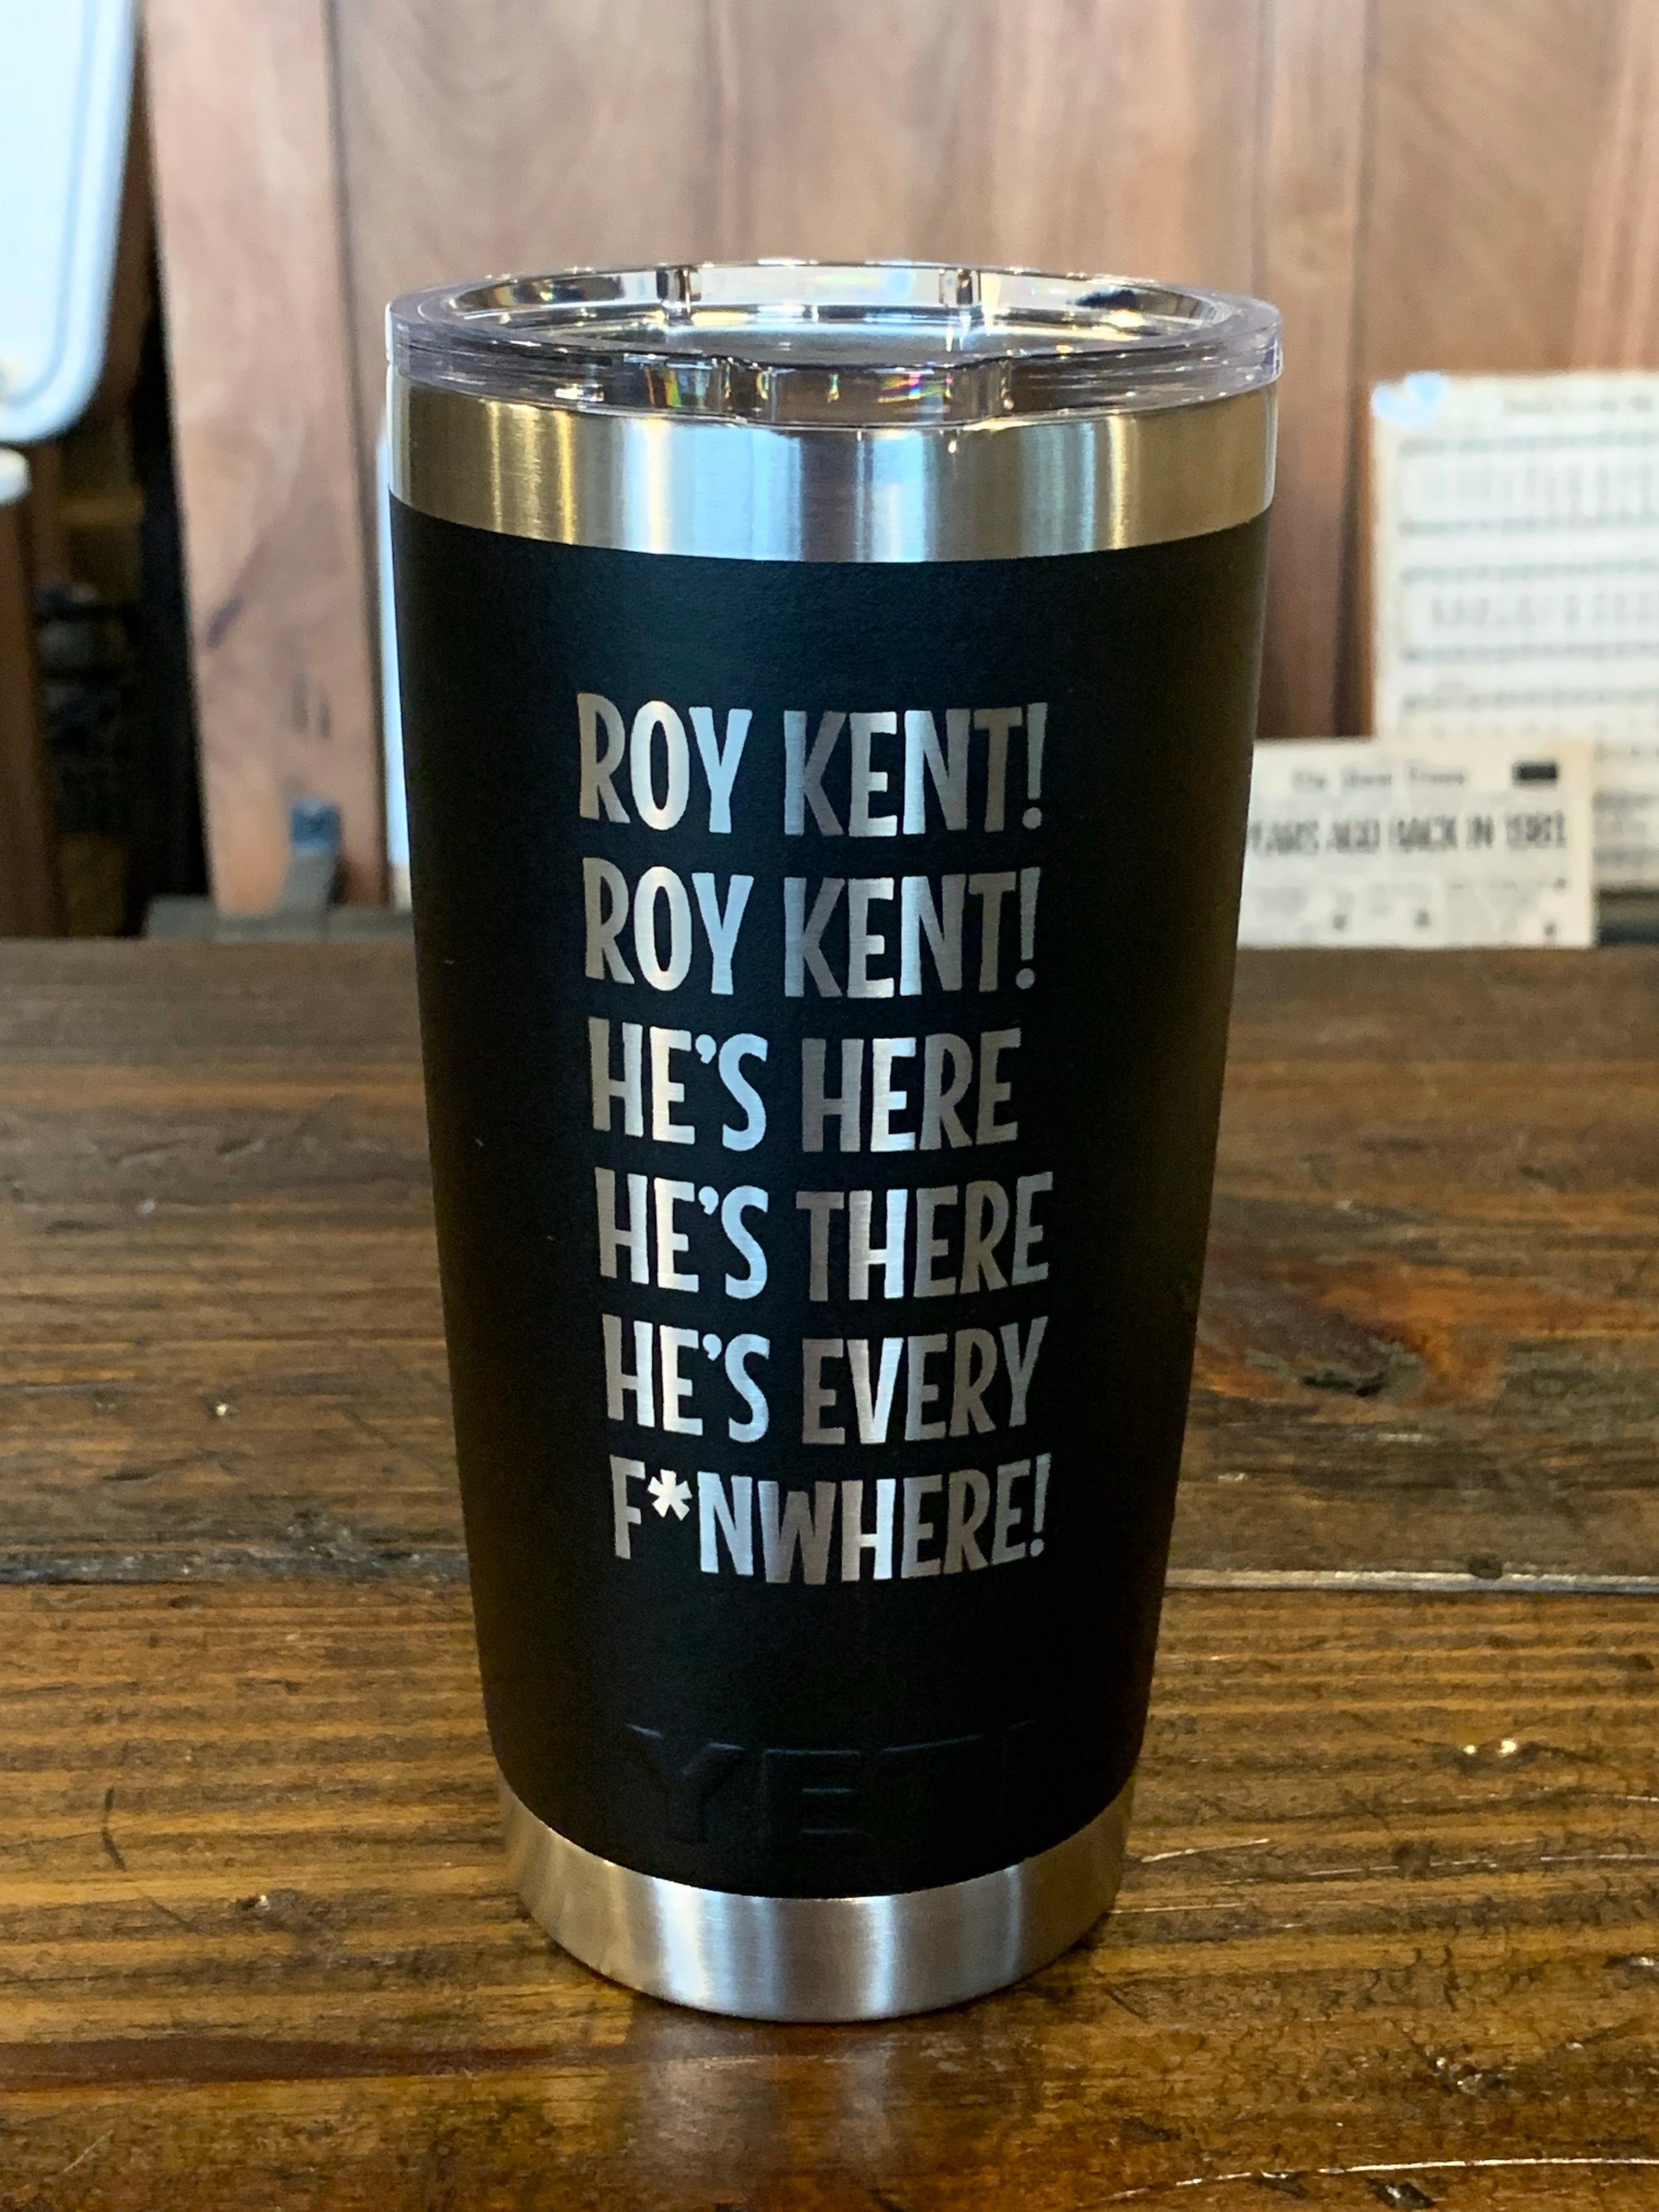 Laser Engraved Authentic Yeti Rambler 16 Oz. COLSTER TALL Can Insulator  Navy Stainless Steel Personalized Vacuum Insulated YETI 